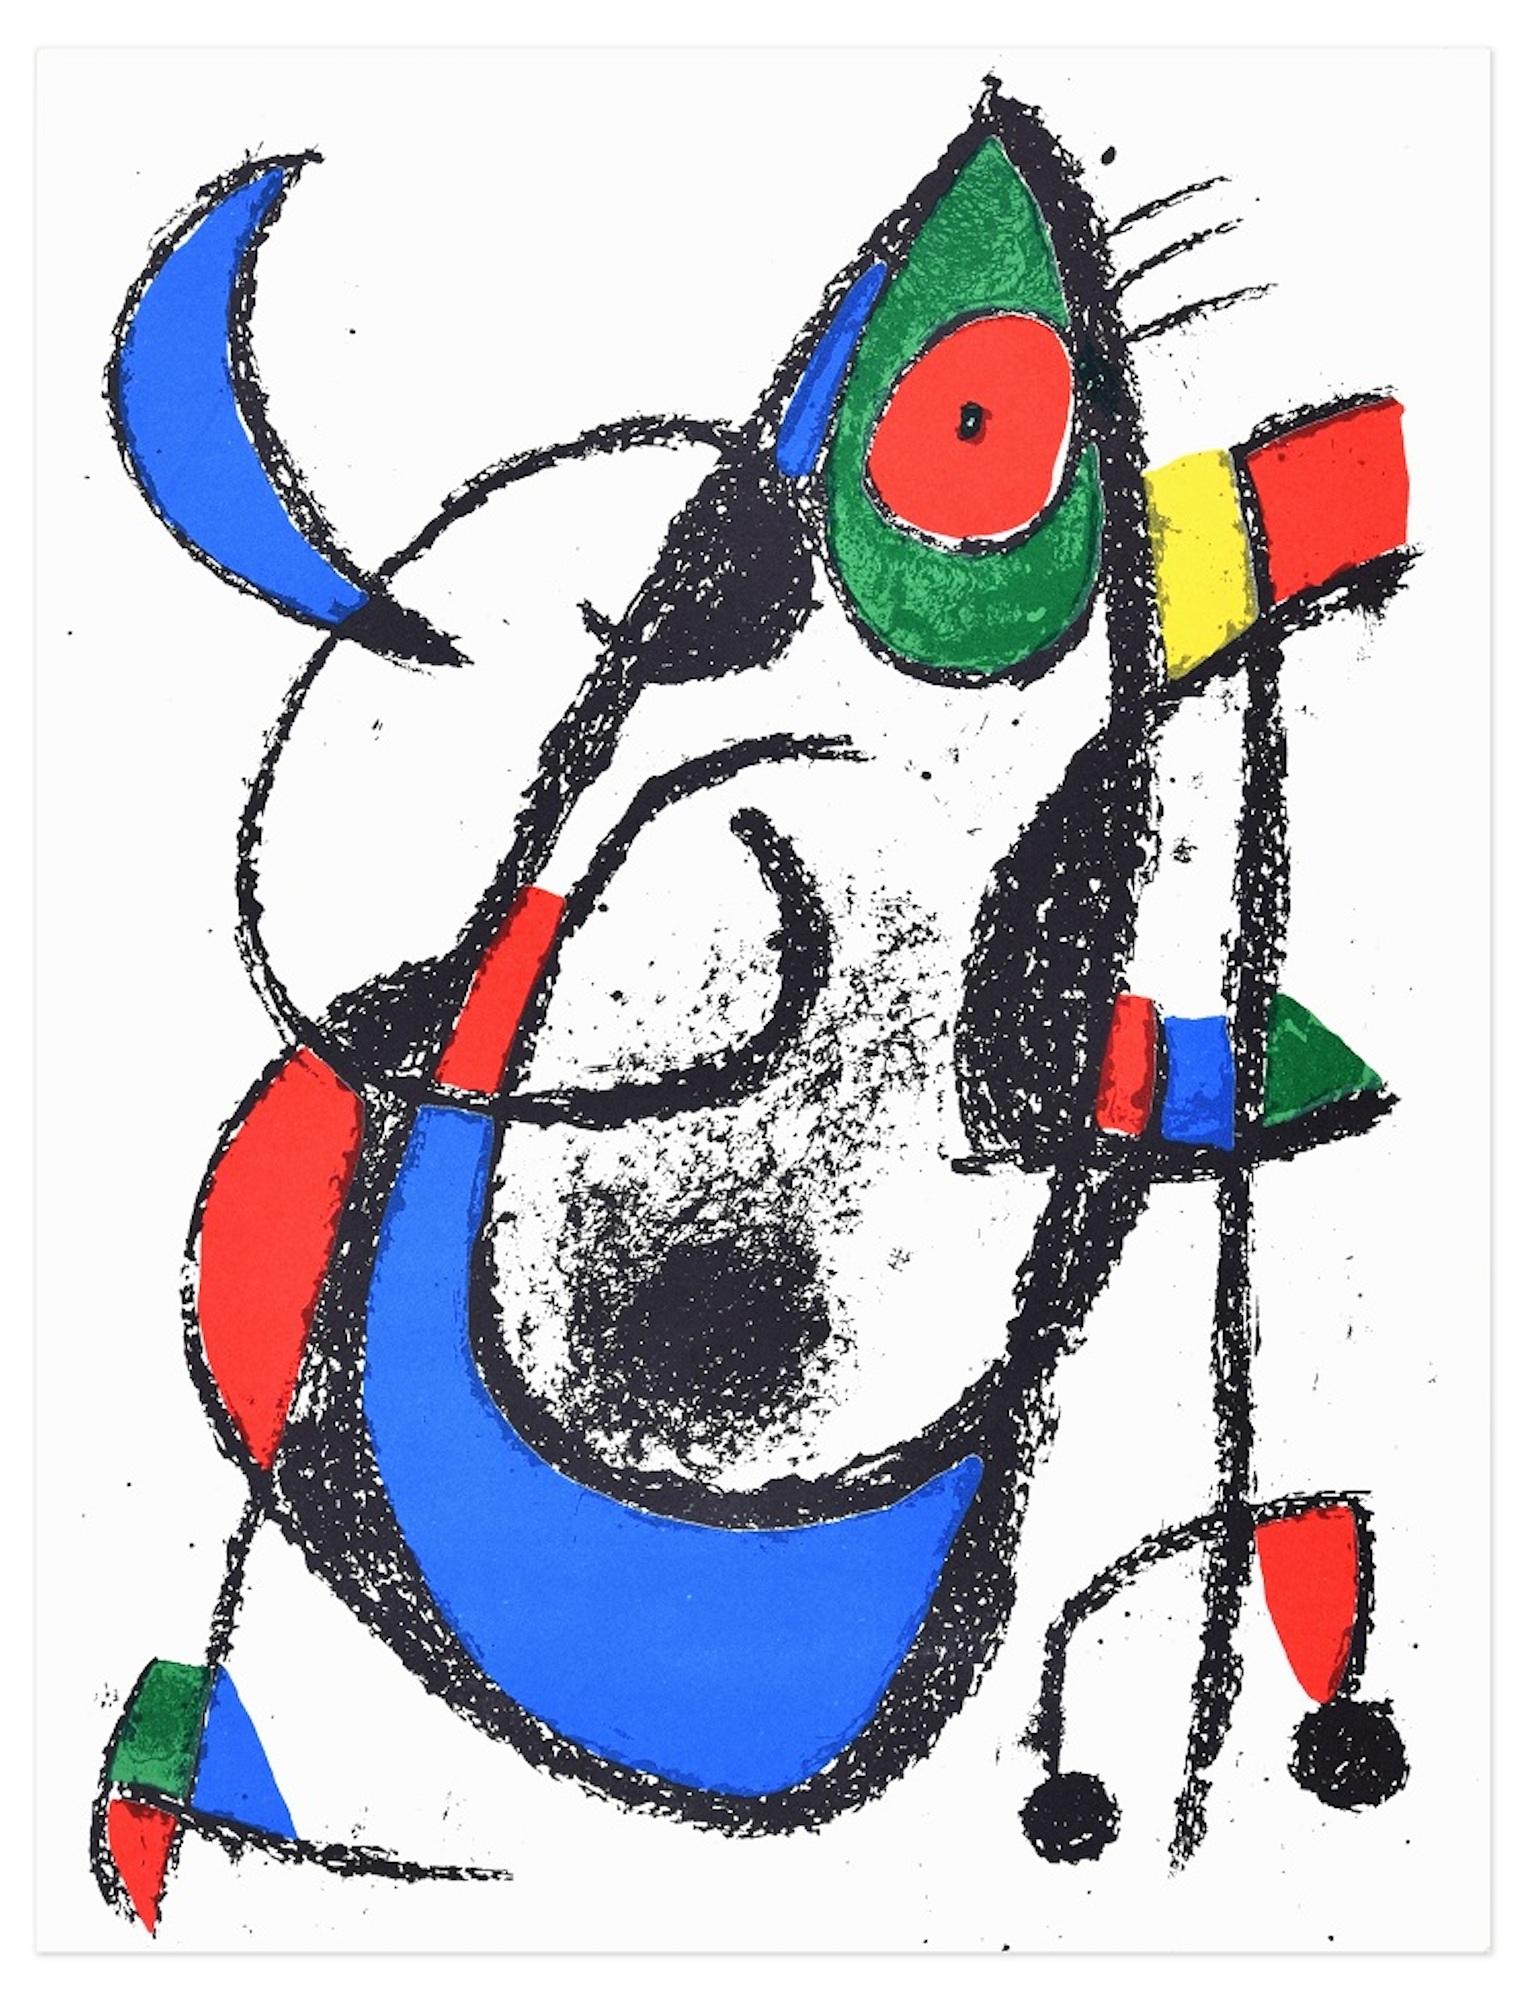 (after) Joan Miró Abstract Print - Composition XI - Lithograph by Joan Mirò - 1974